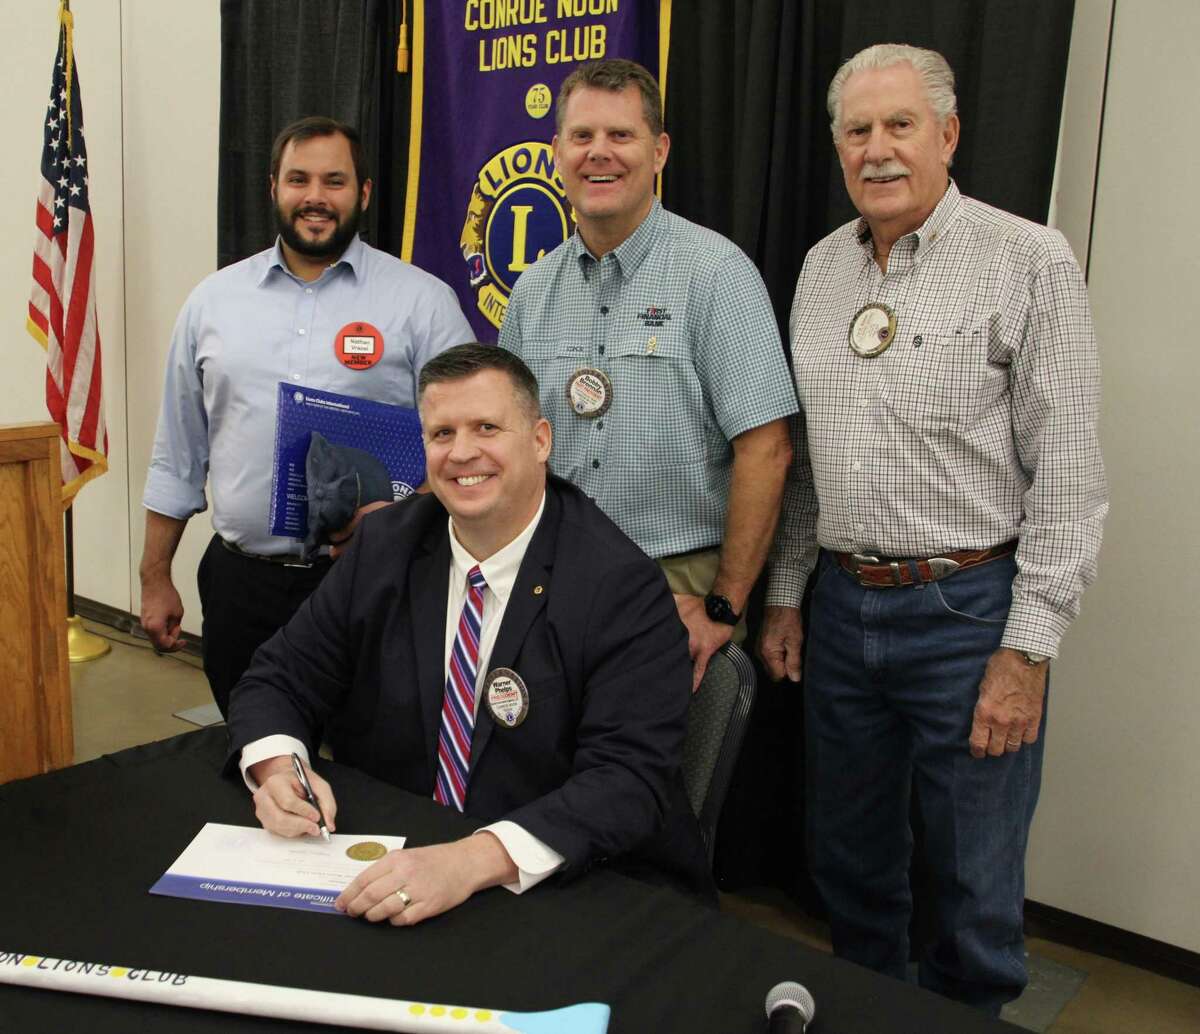 It’s all in the Family - Conroe Noon Lions Club President Warner Phelps (seated) make’s it official by signing the new member certificate of Nathan Vrazel (back left) as the third member of the Brennan clan to join the club. Nathan is the son-in-law to Bobby Brennan (back center) and grandson-in-law to Pat Brennan (back right).